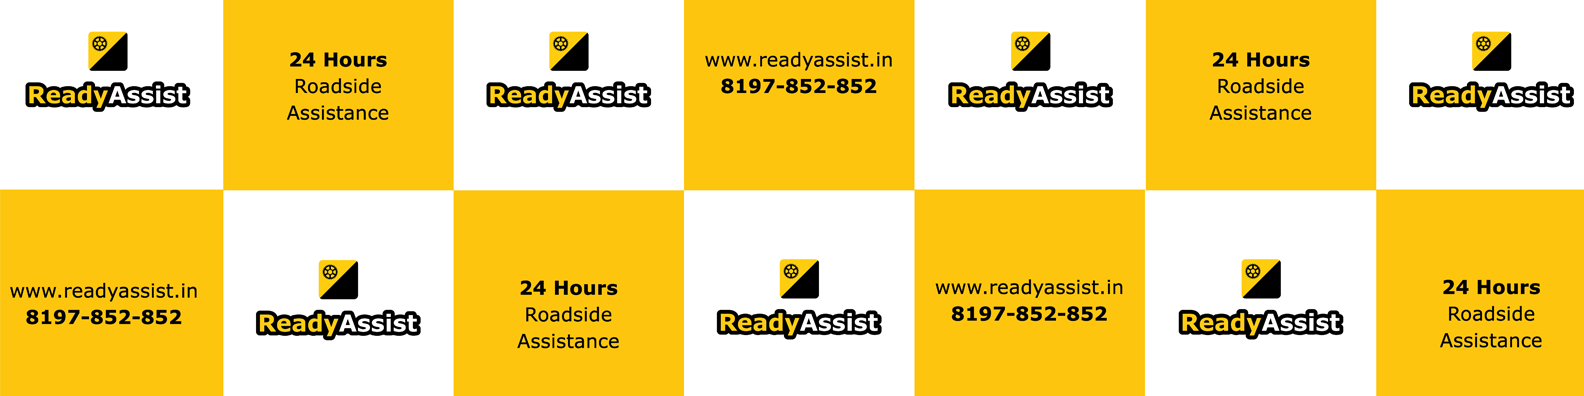 ReadyAssist cover picture